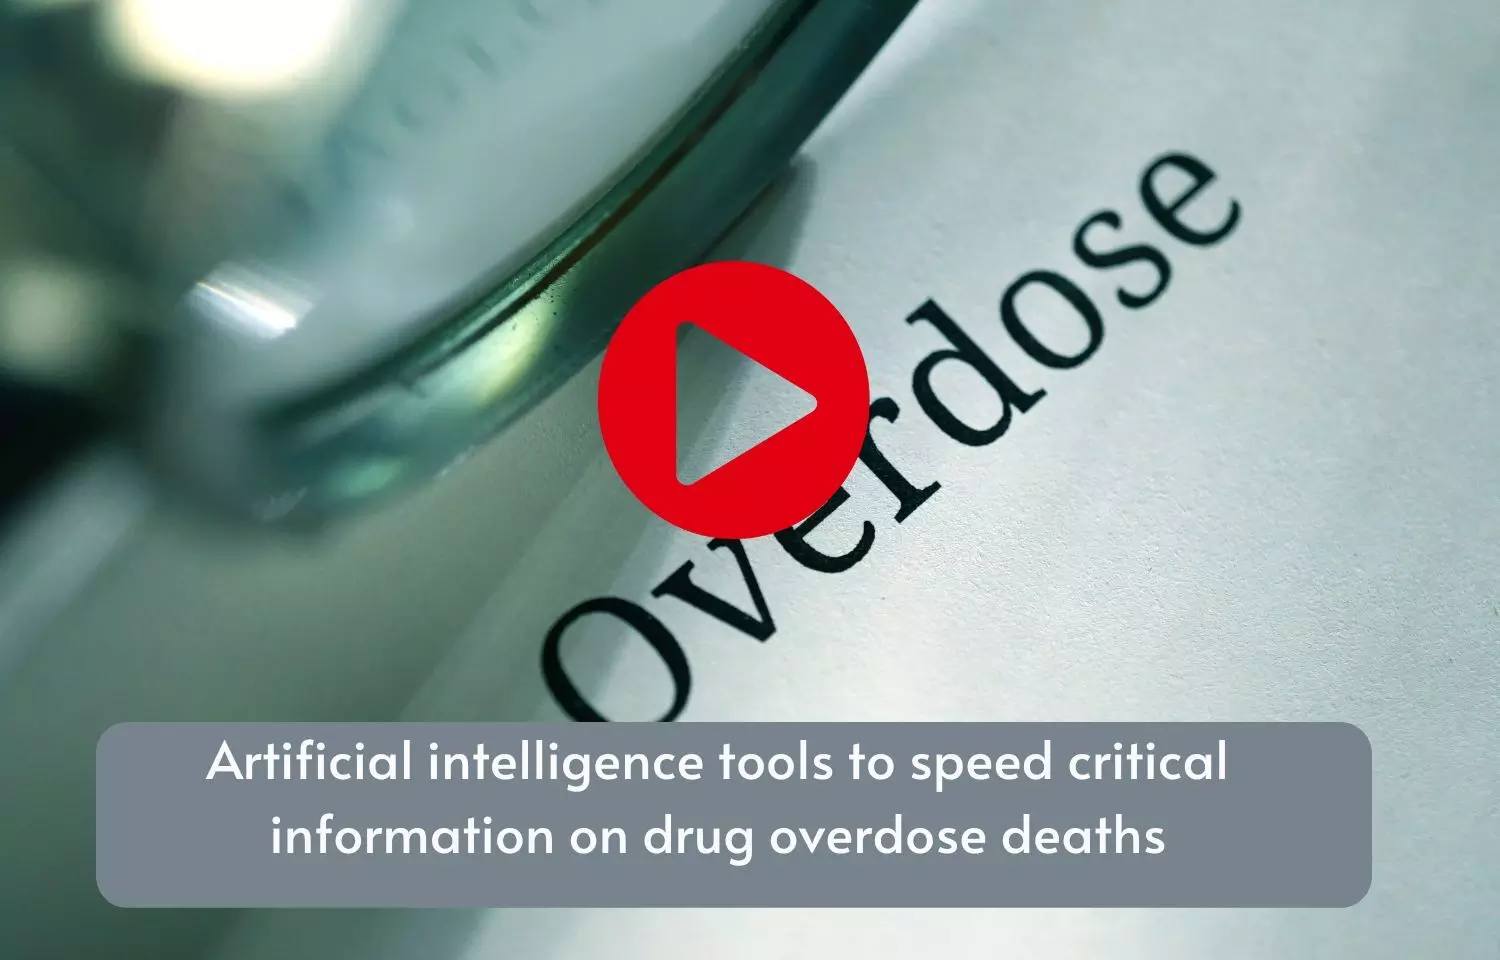 Artificial intelligence tools to speed critical information on drug overdose deaths